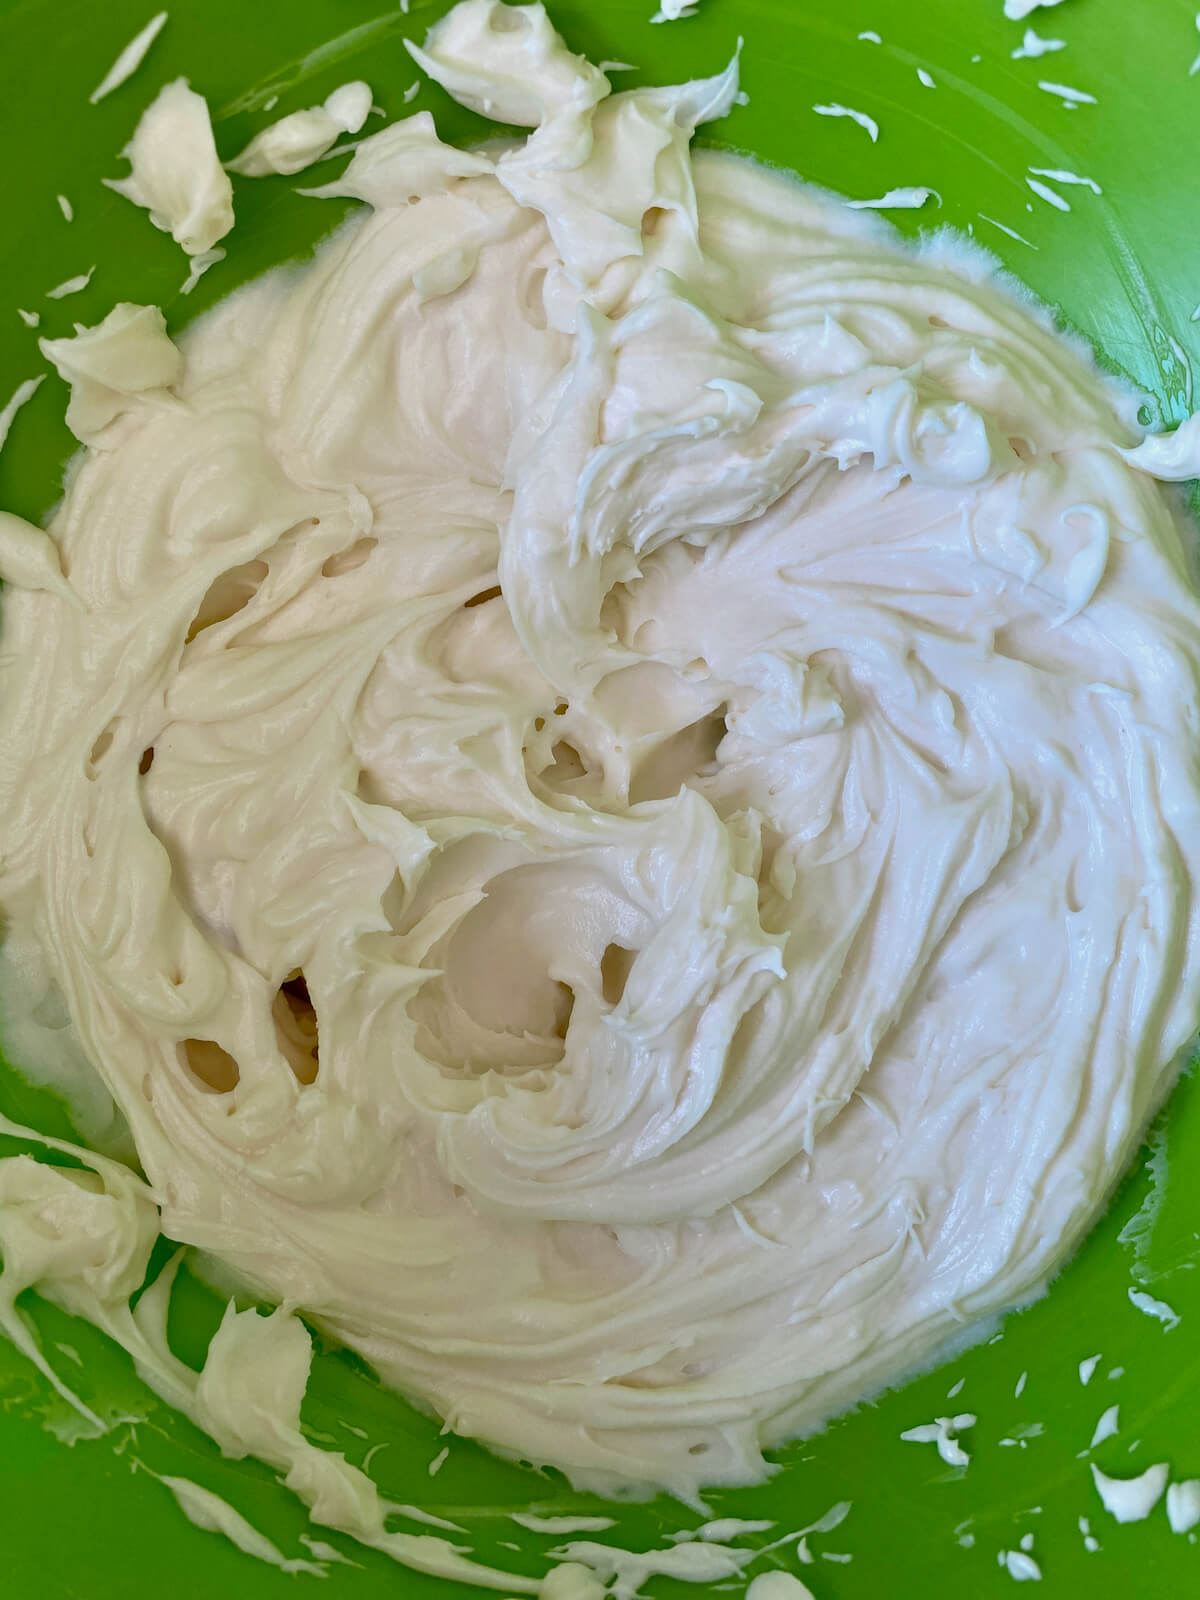 A green mixing bowl filled with whipped cheesecake filling.